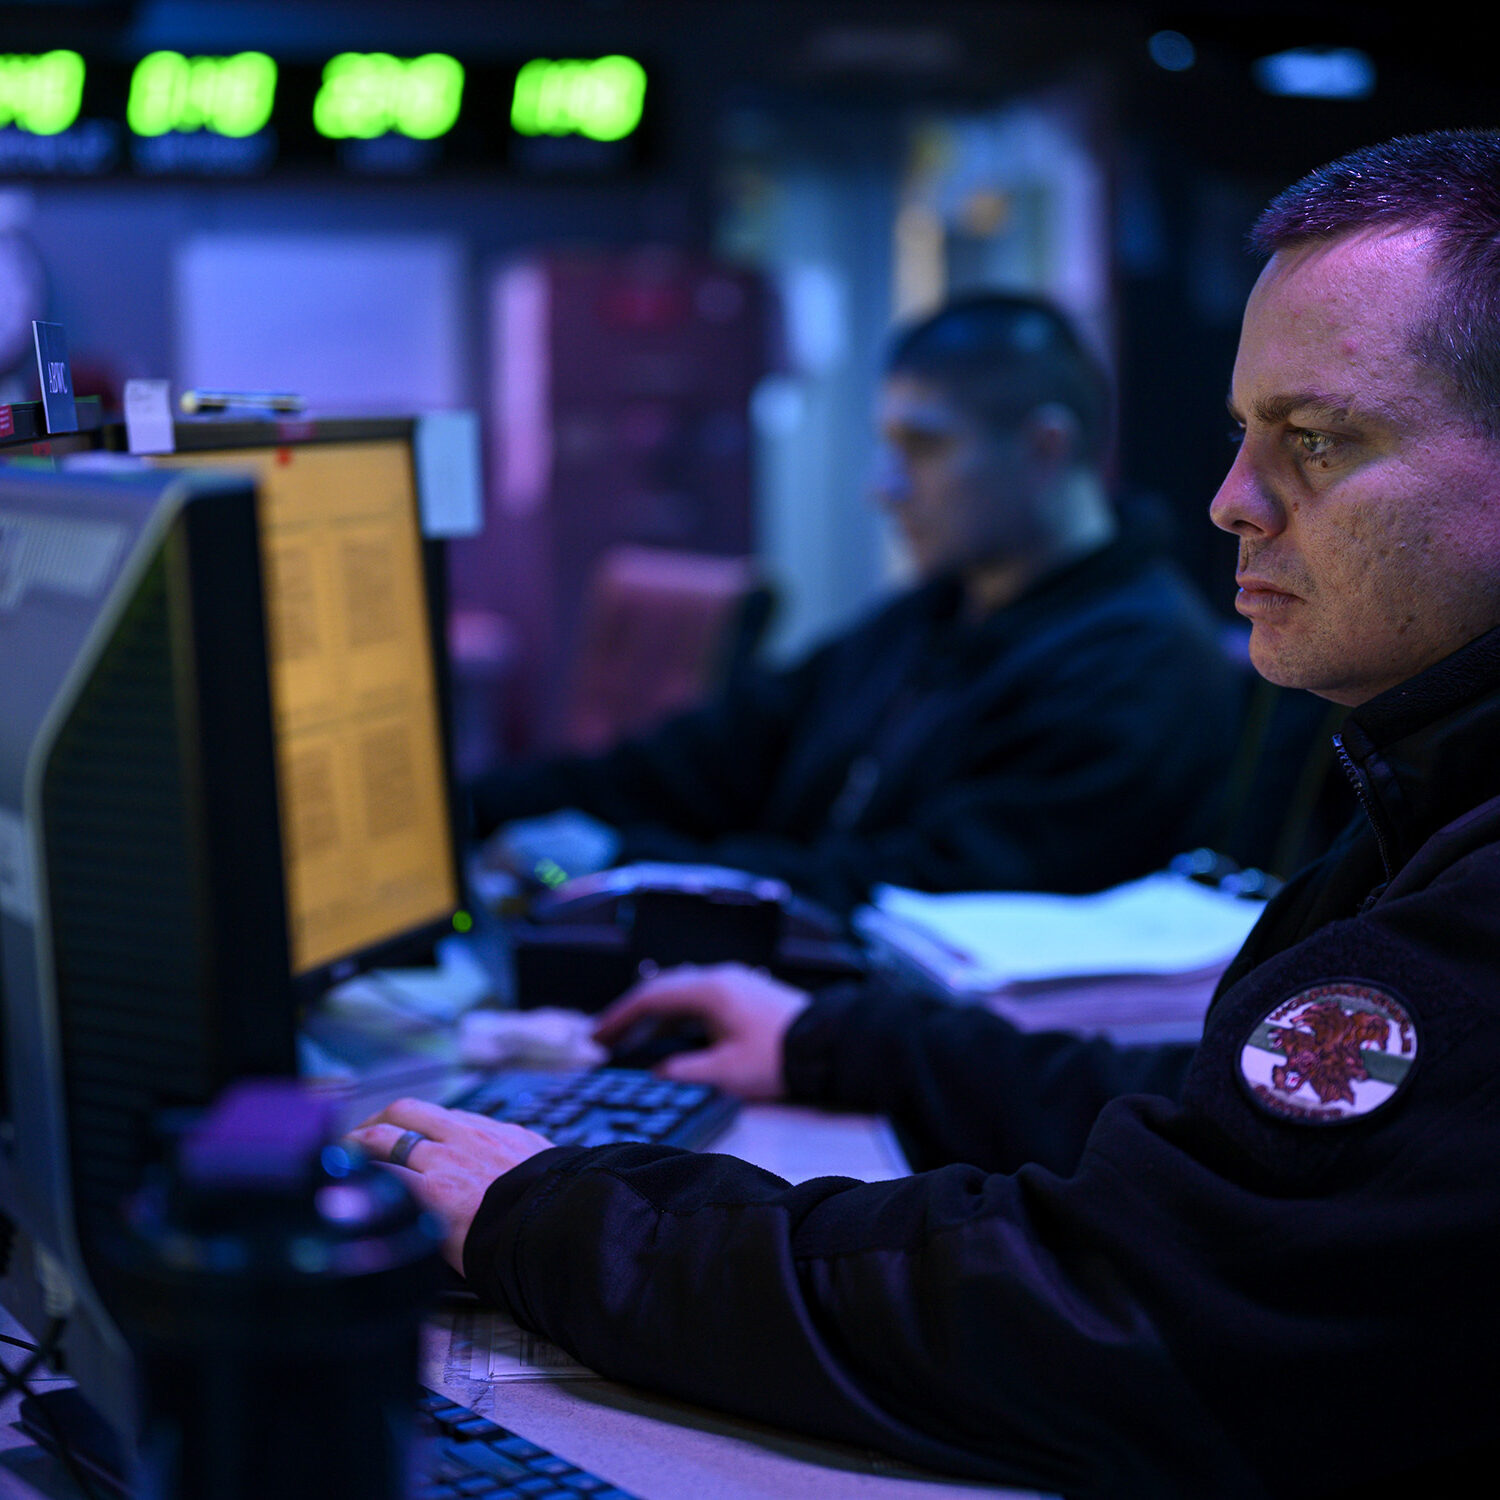 190825-N-PM193-1031

RED SEA (Aug. 25, 2019) Logistics Specialist 1st Class John Martin, assigned to Amphibious Squadron (CPR) 5, selected to become a chief petty officer, stands as the assistant battle watch captain inside the joint operations center aboard amphibious assault ship USS Boxer (LHD 4) during exercise Eager Lion 2019. Eager Lion, U.S. Central Command’s largest and most complex exercise, is an opportunity to integrate forces in a multilateral environment, operate in realistic terrain and strengthen military-to-military relationships. Boxer is part of the Boxer Amphibious Ready Group and 11th Marine Expeditionary Unit and is deployed to the U.S. 5th Fleet area of operations in support of naval operations to ensure maritime stability and security in the Central Region, connecting the Mediterranean and the Pacific through the Western Indian Ocean and three strategic choke points. (U.S. Navy photo by Mass Communication Specialist 3rd Class Alexander C. Kubitza/Released)